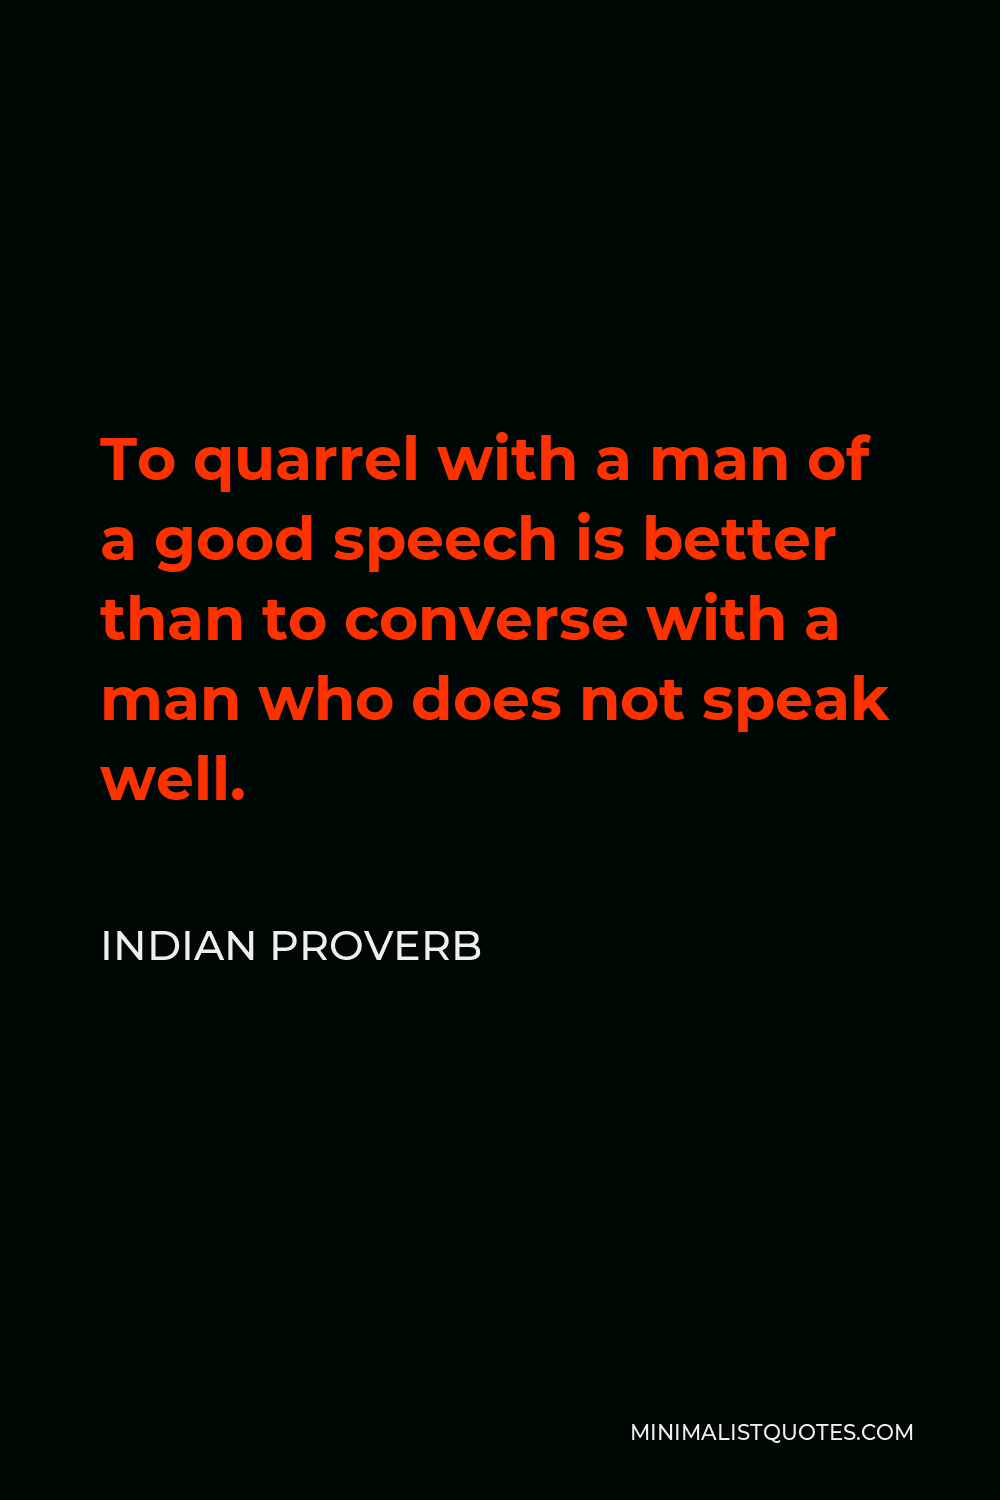 Indian Proverb Quote - To quarrel with a man of a good speech is better than to converse with a man who does not speak well.